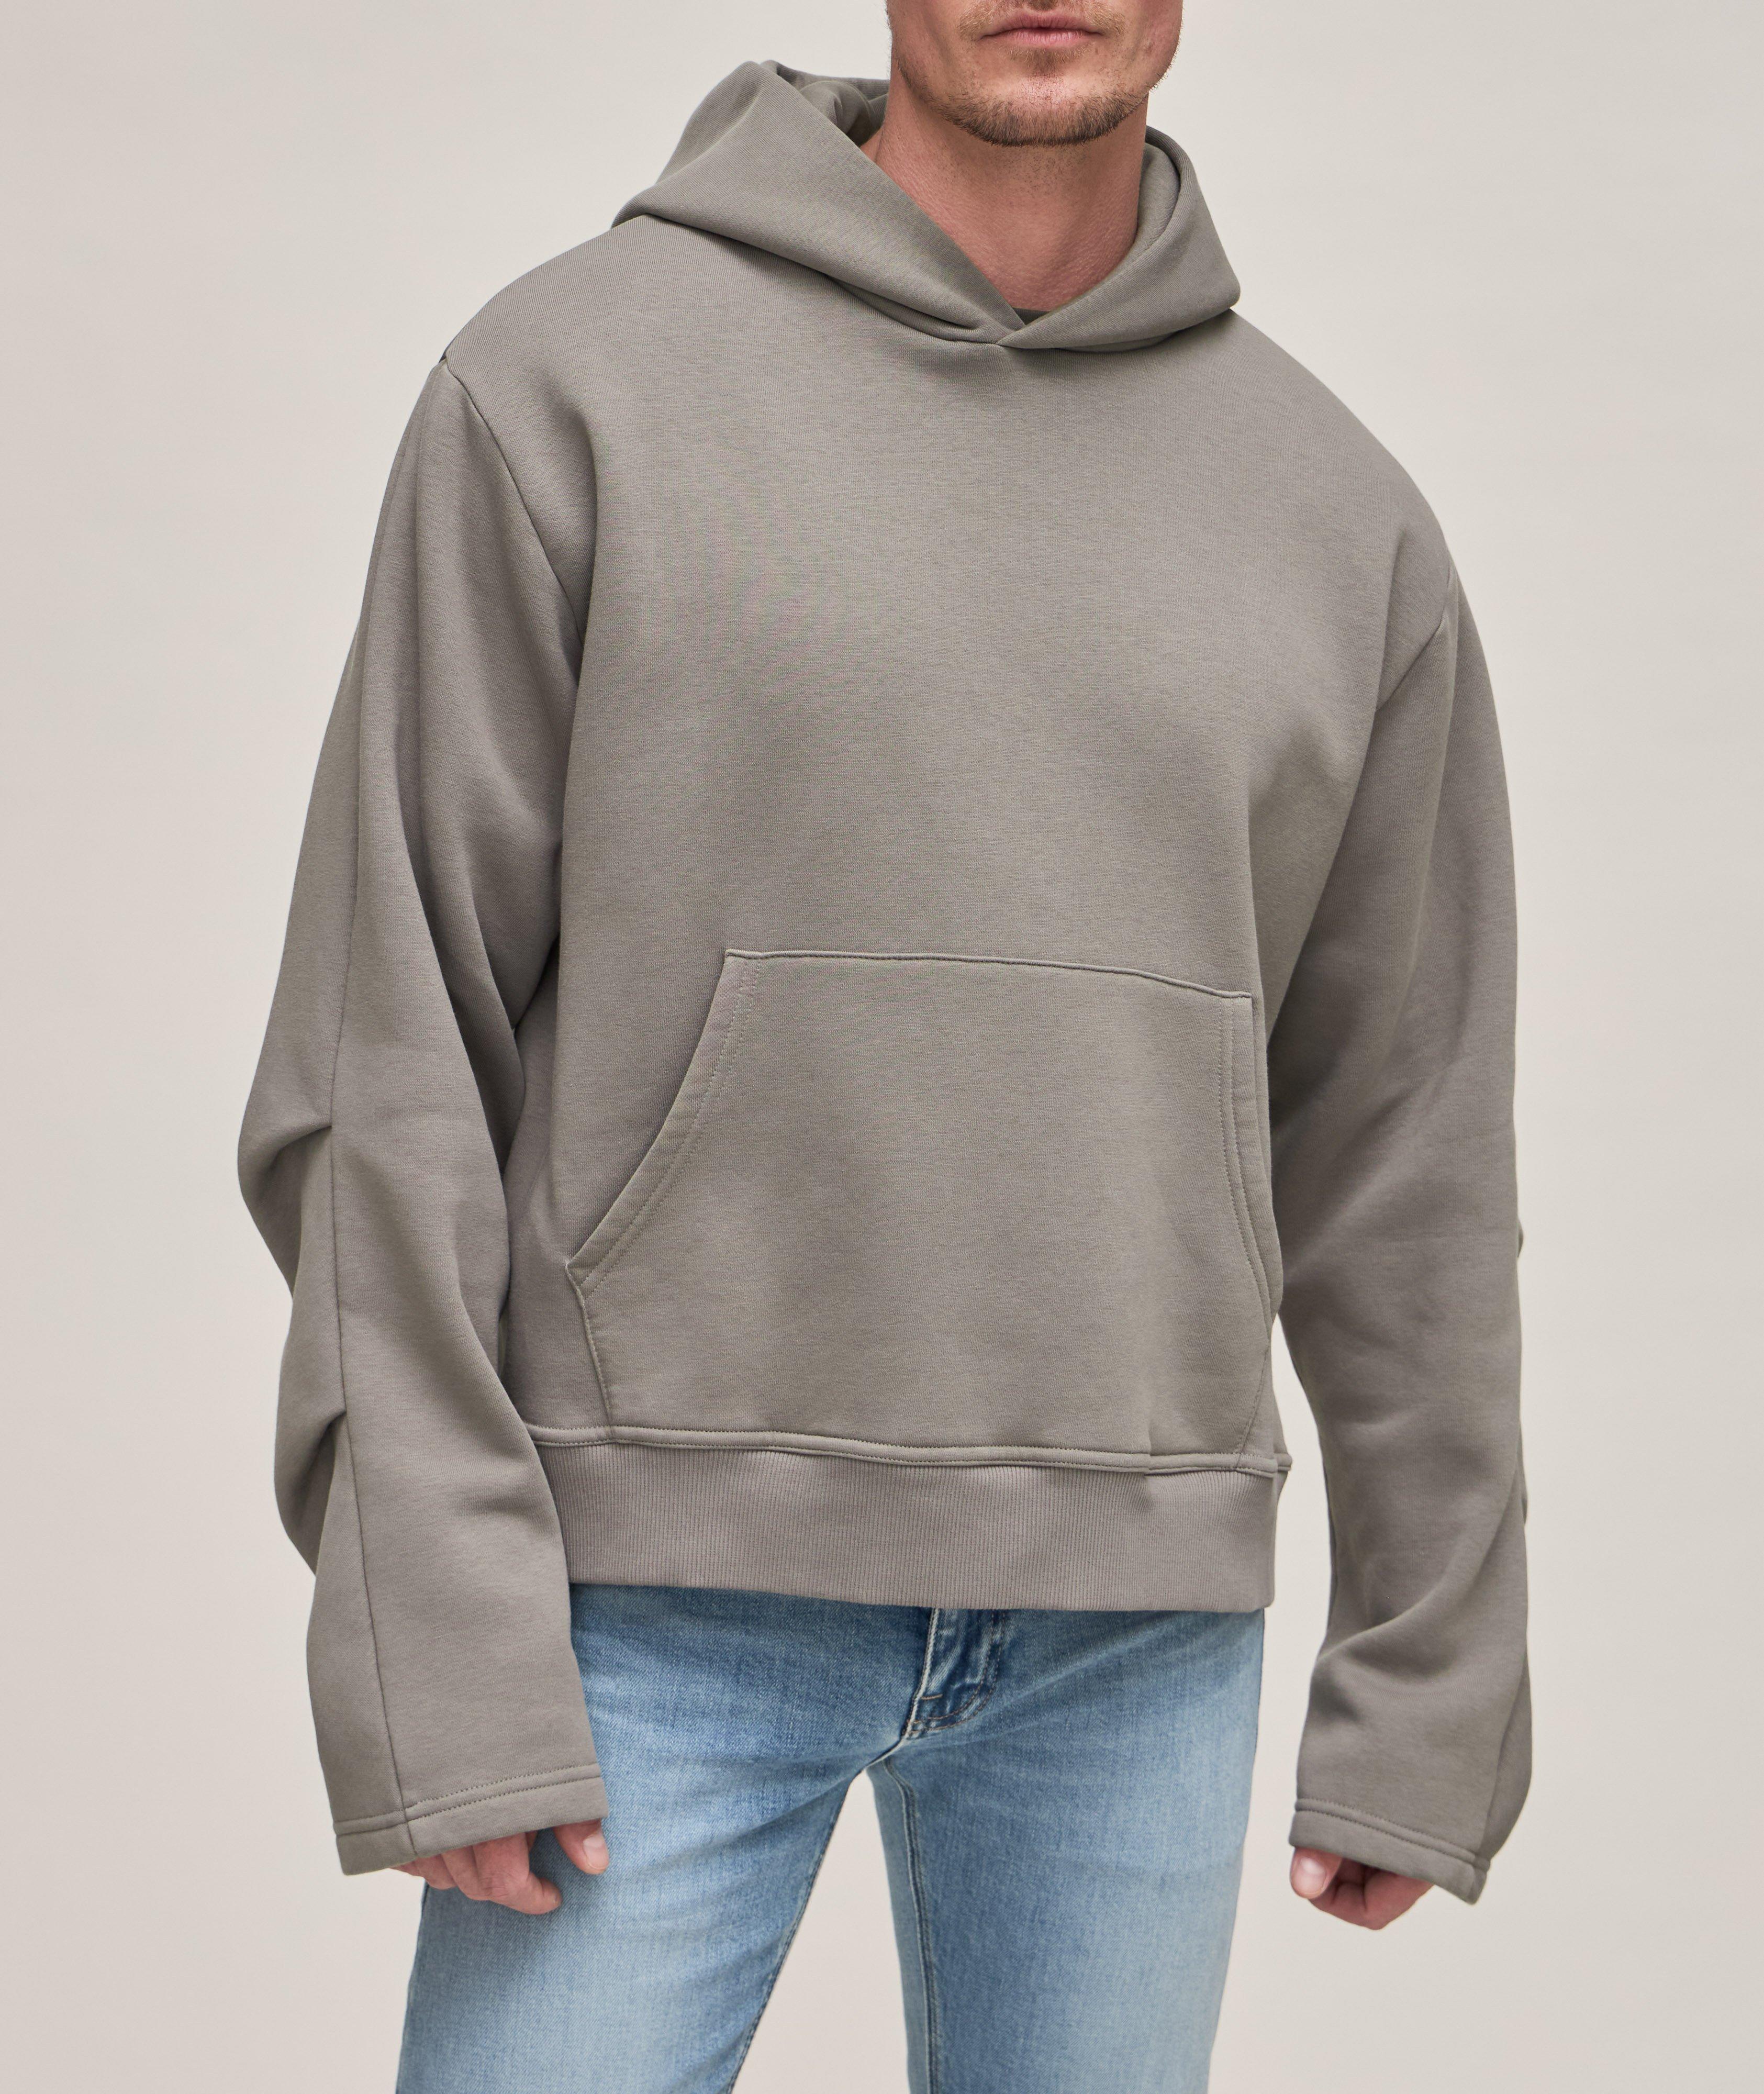 Cotton-Blend Hooded Sweater